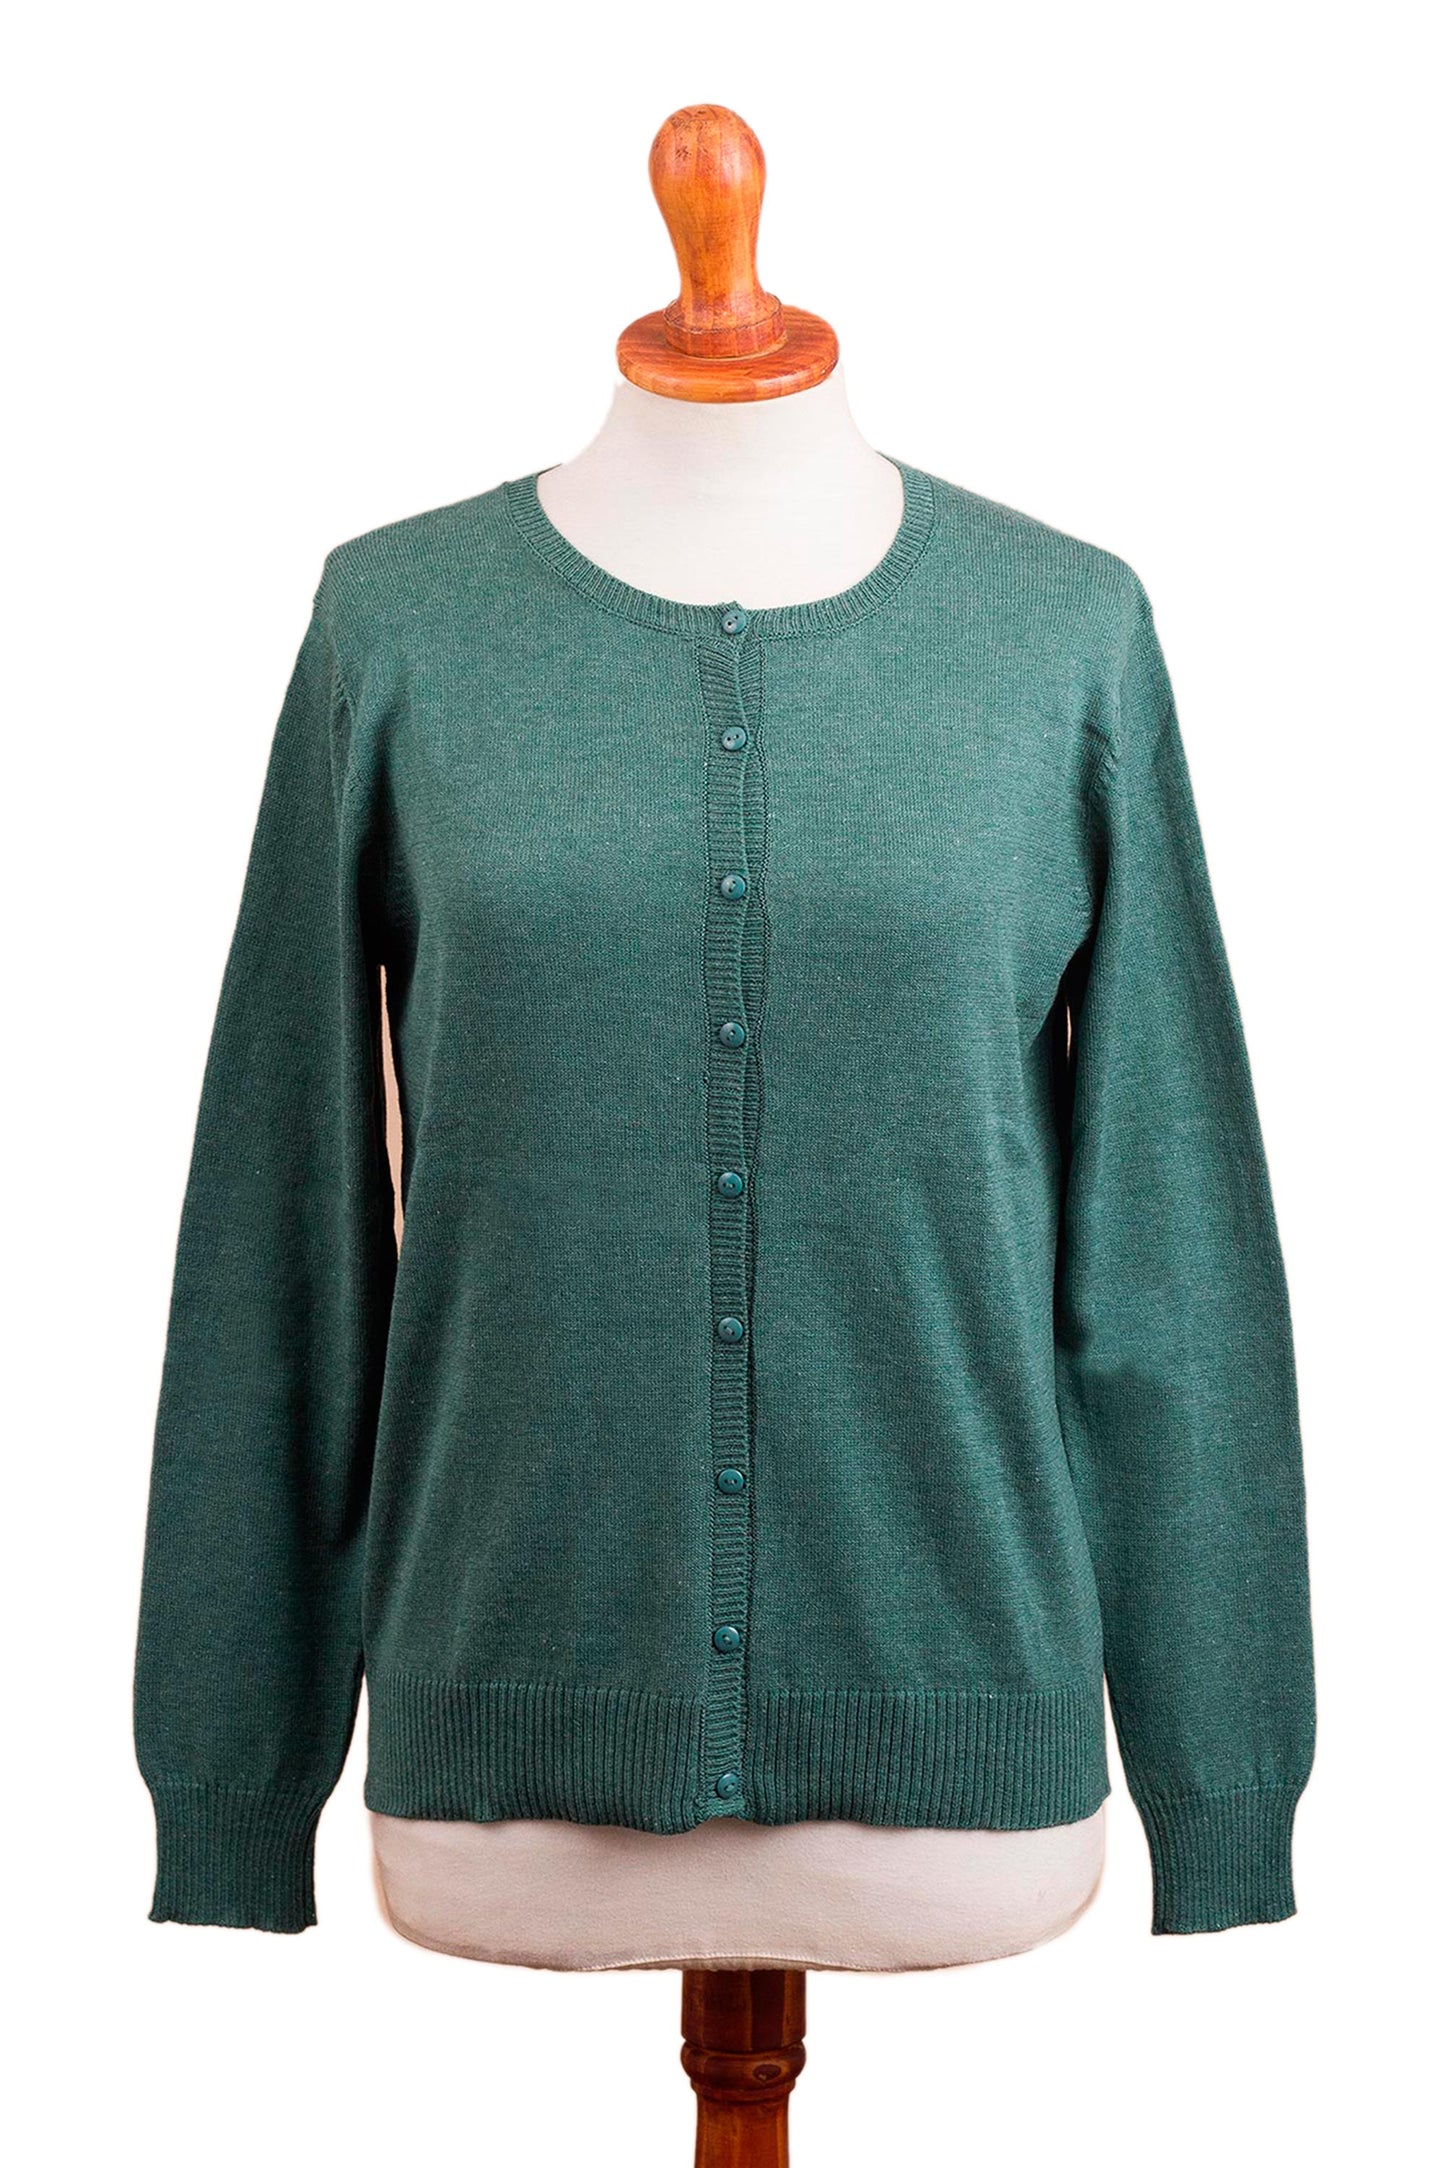 Simple Style in Viridian Cotton Blend Green Cardigan Sweater from Peru